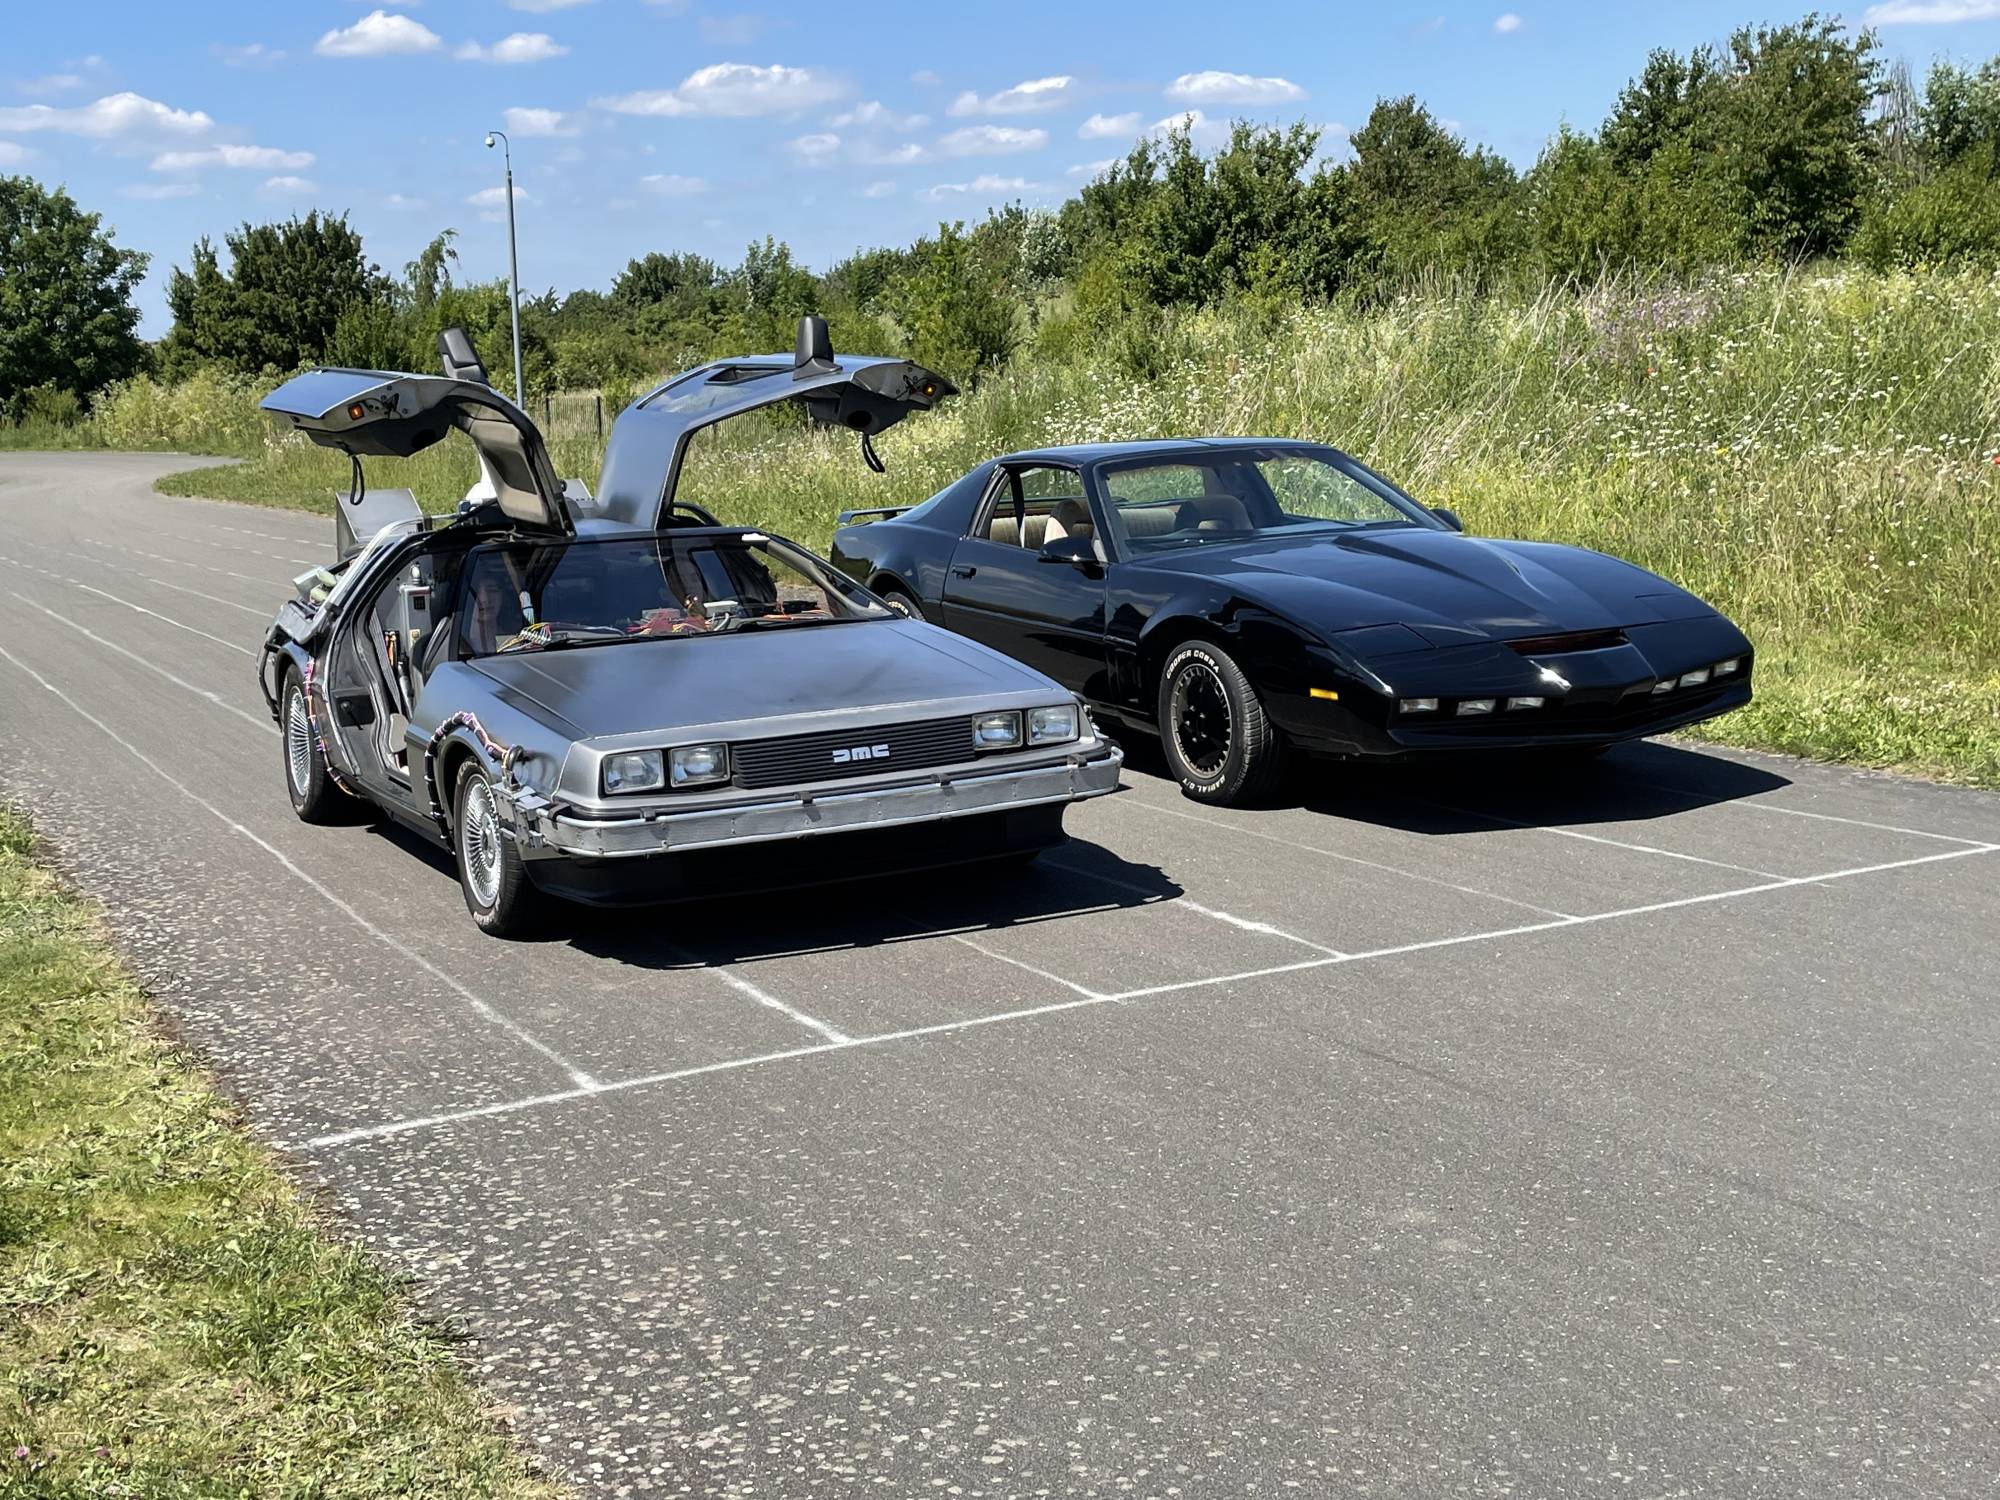 BTTF Car DeLorean Time Machine Vs Knight Rider K.I.T.T For the Scalextric live action video for the new racing set. Back to the Future Vs Knight Rider 